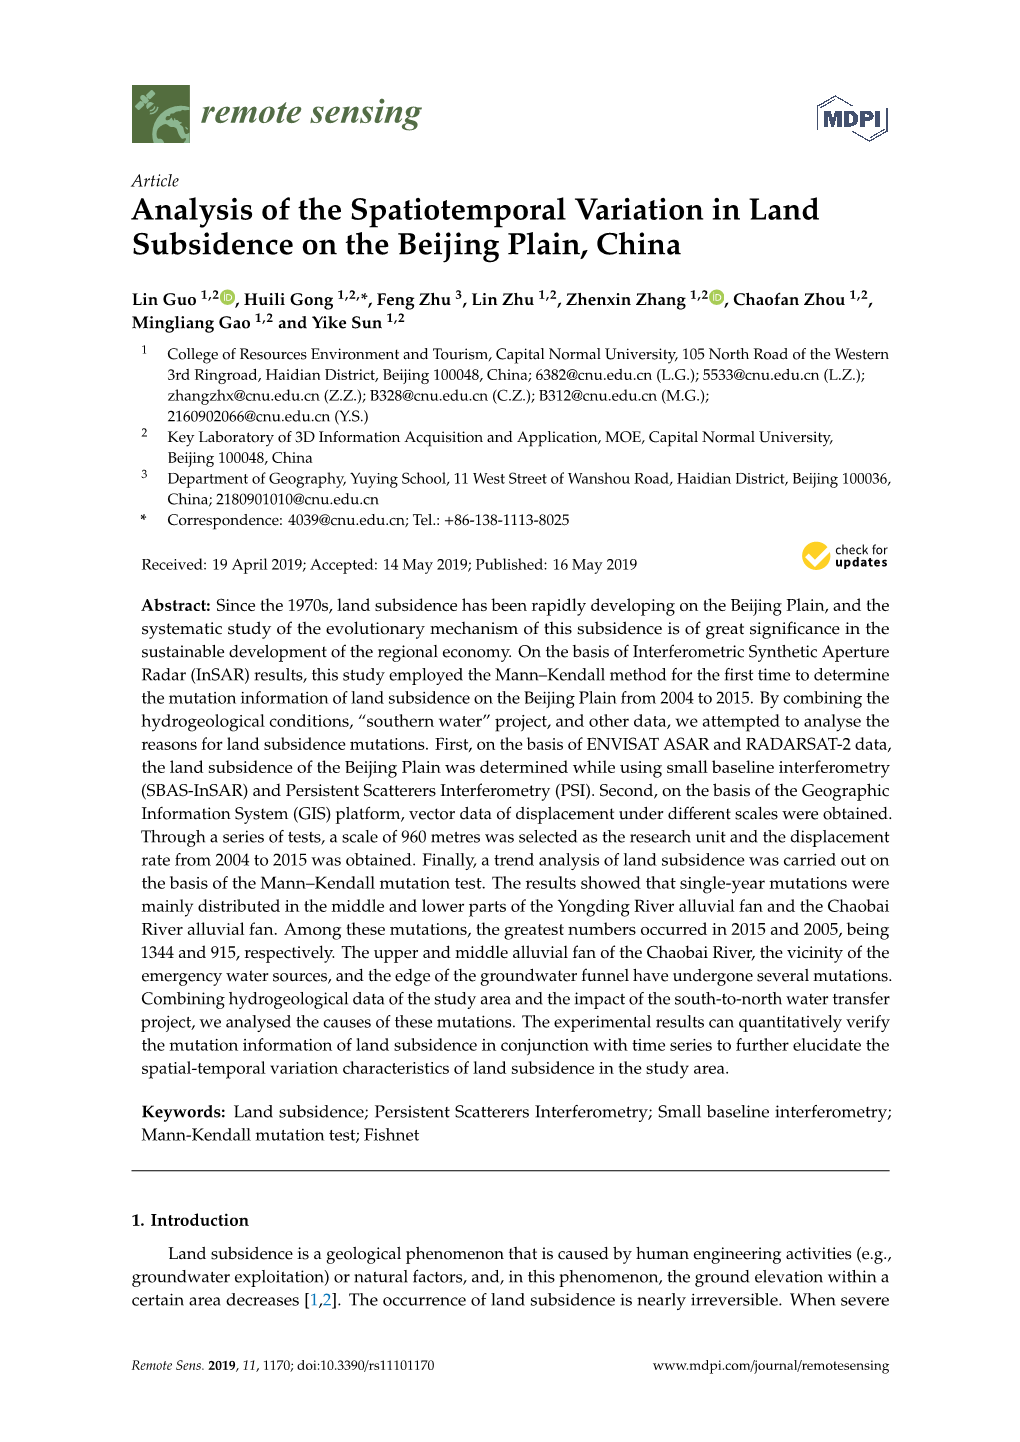 Analysis of the Spatiotemporal Variation in Land Subsidence on the Beijing Plain, China